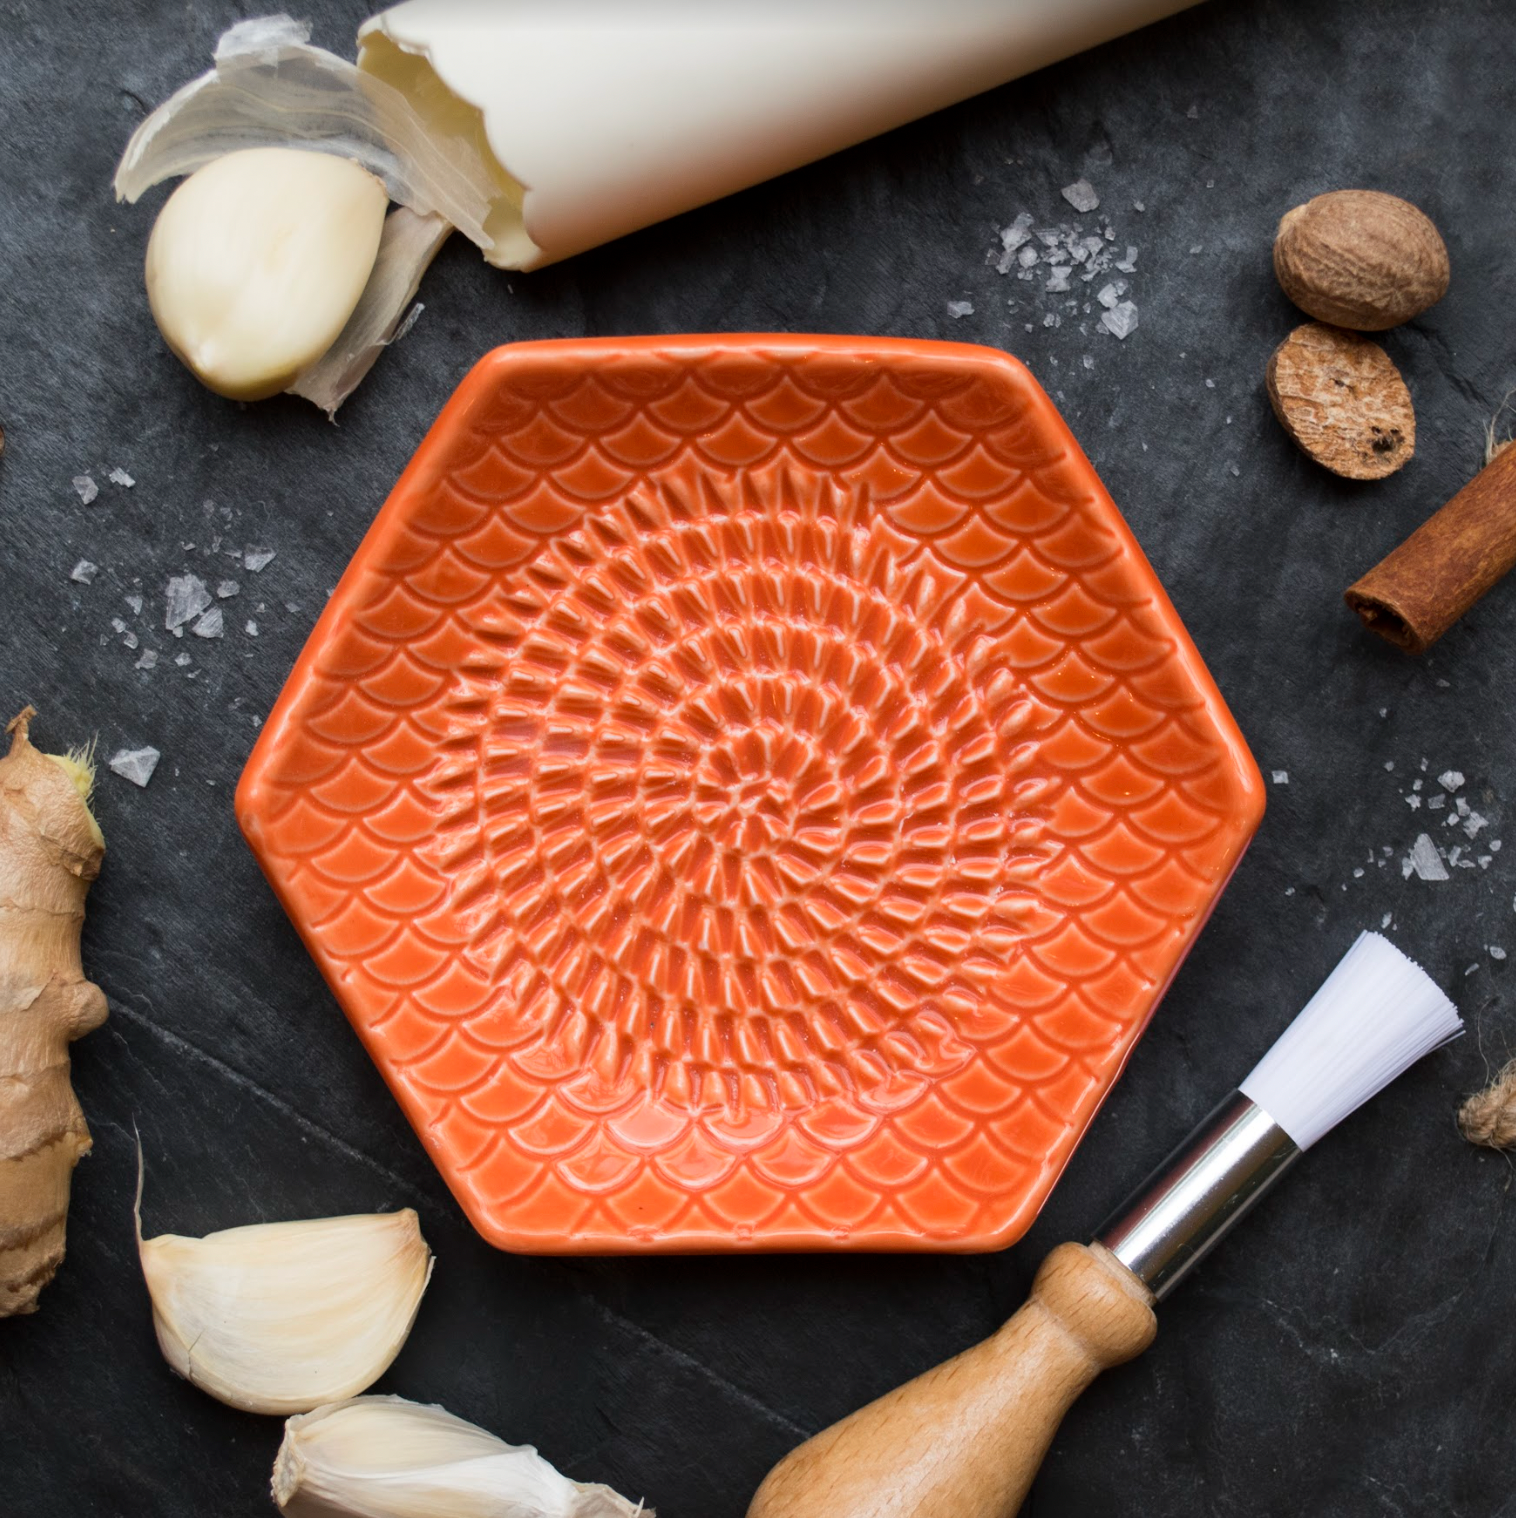 new colorful garlic grater plate